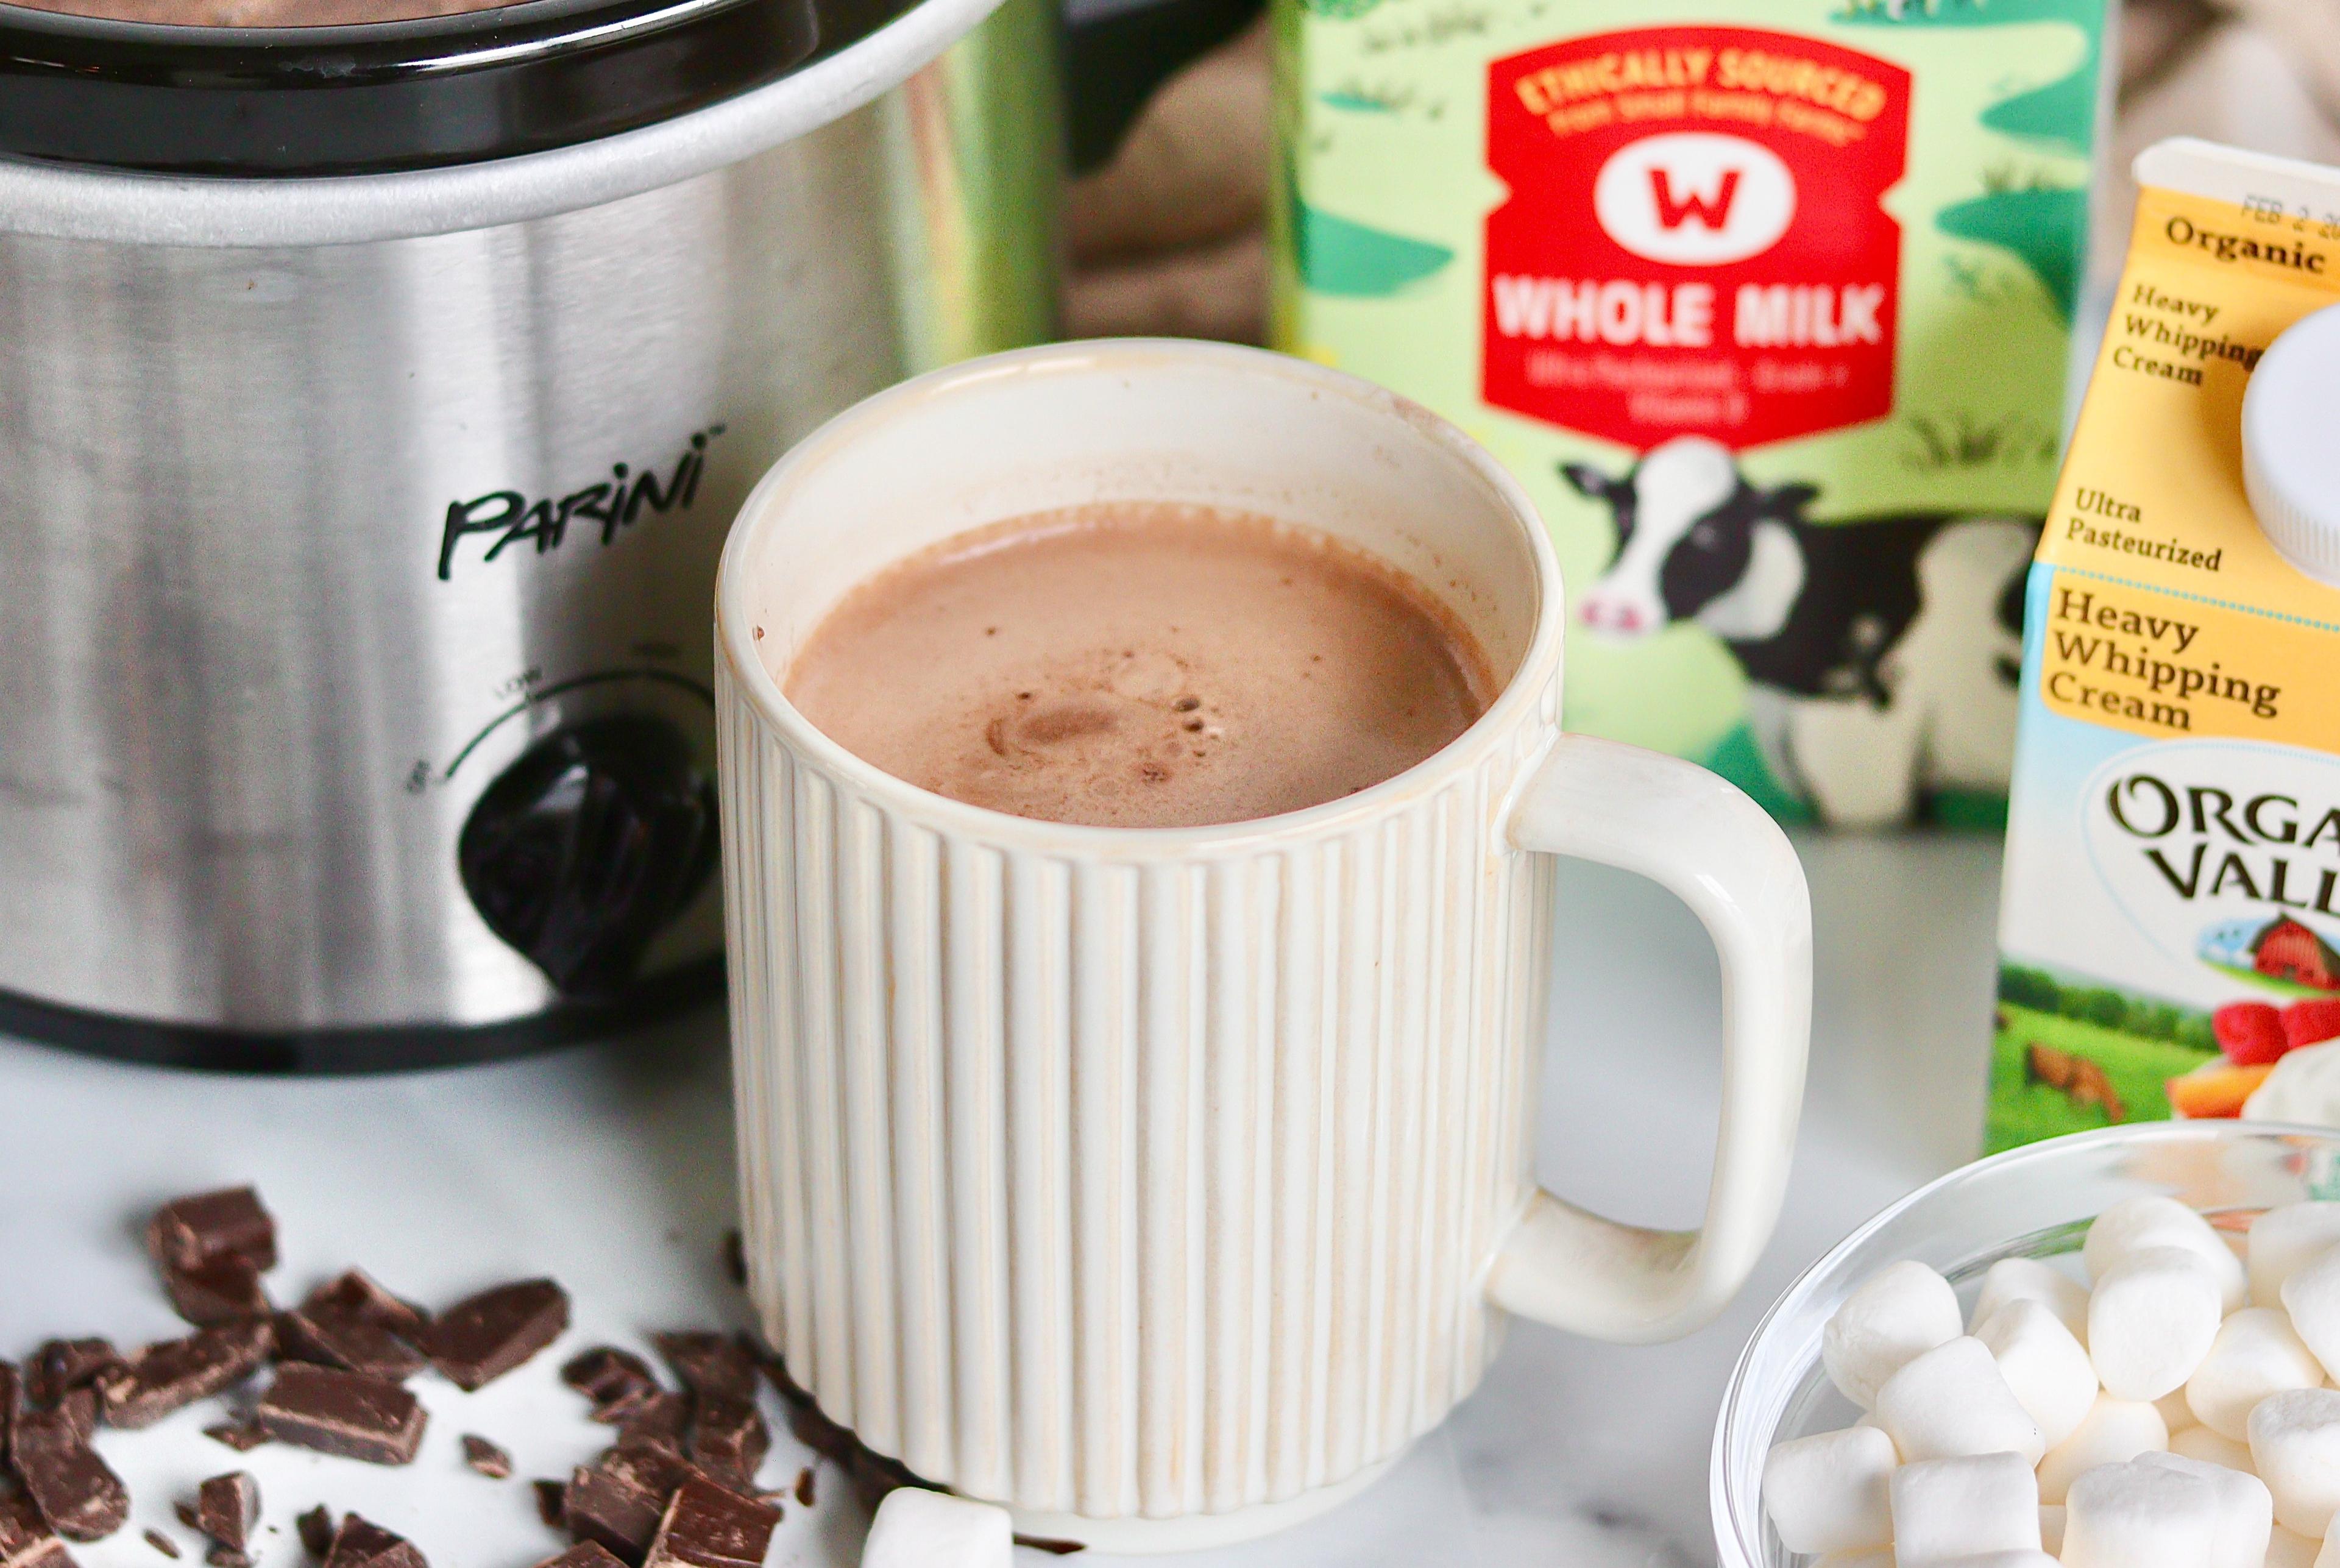 A mug of hot chocolate next to a slow cooker, chocolate shavings, marshmallows and organic dairy products used to make hot chocolate.